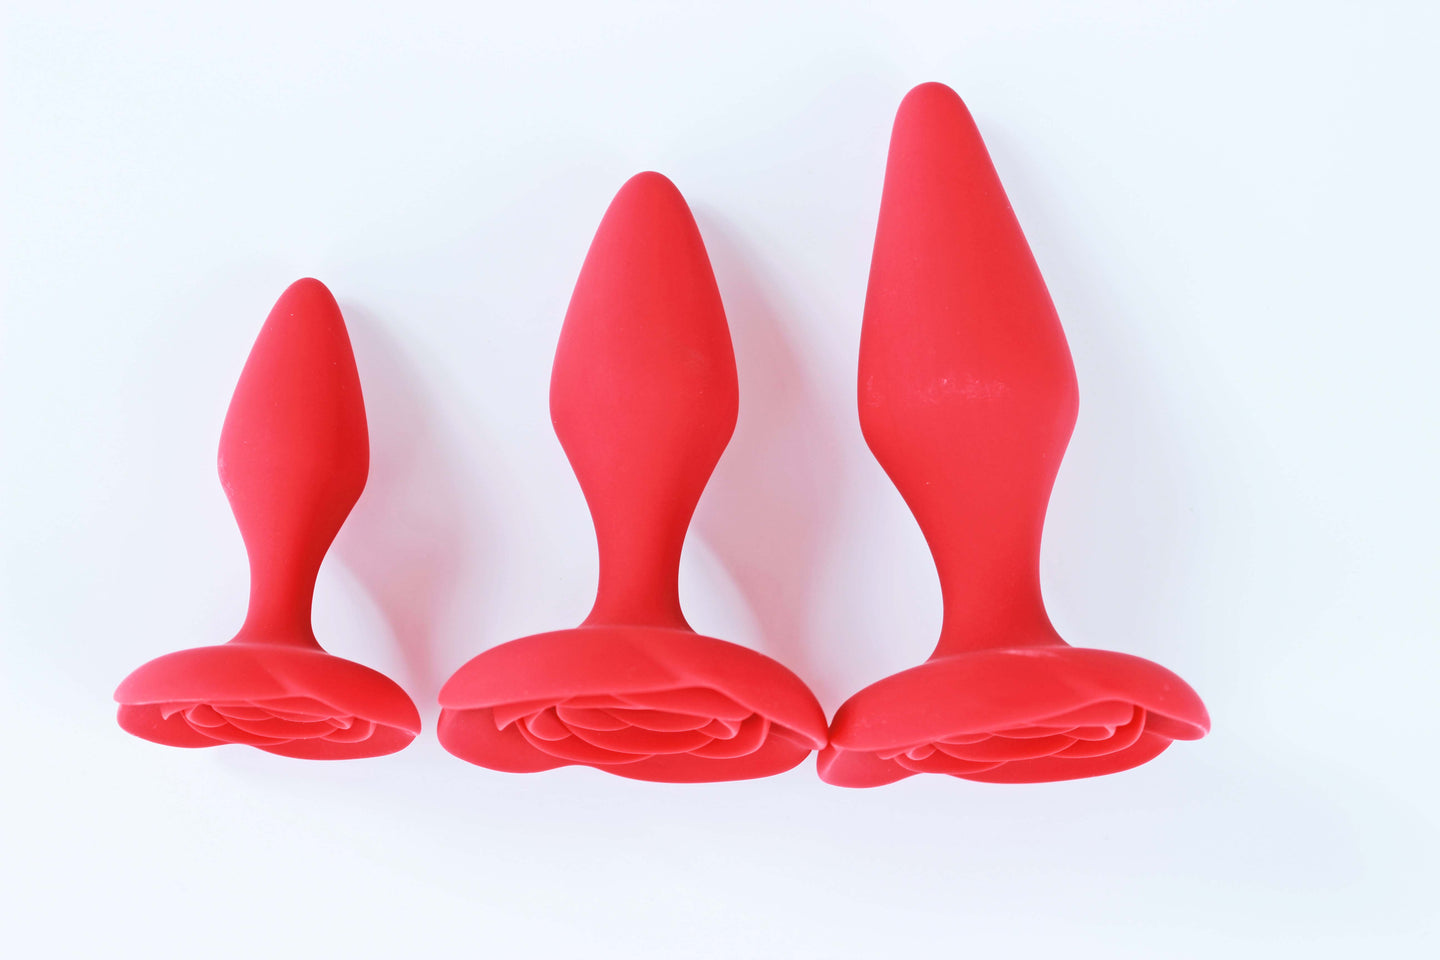 3 sizes of red rose anal training butt plugs on a white background